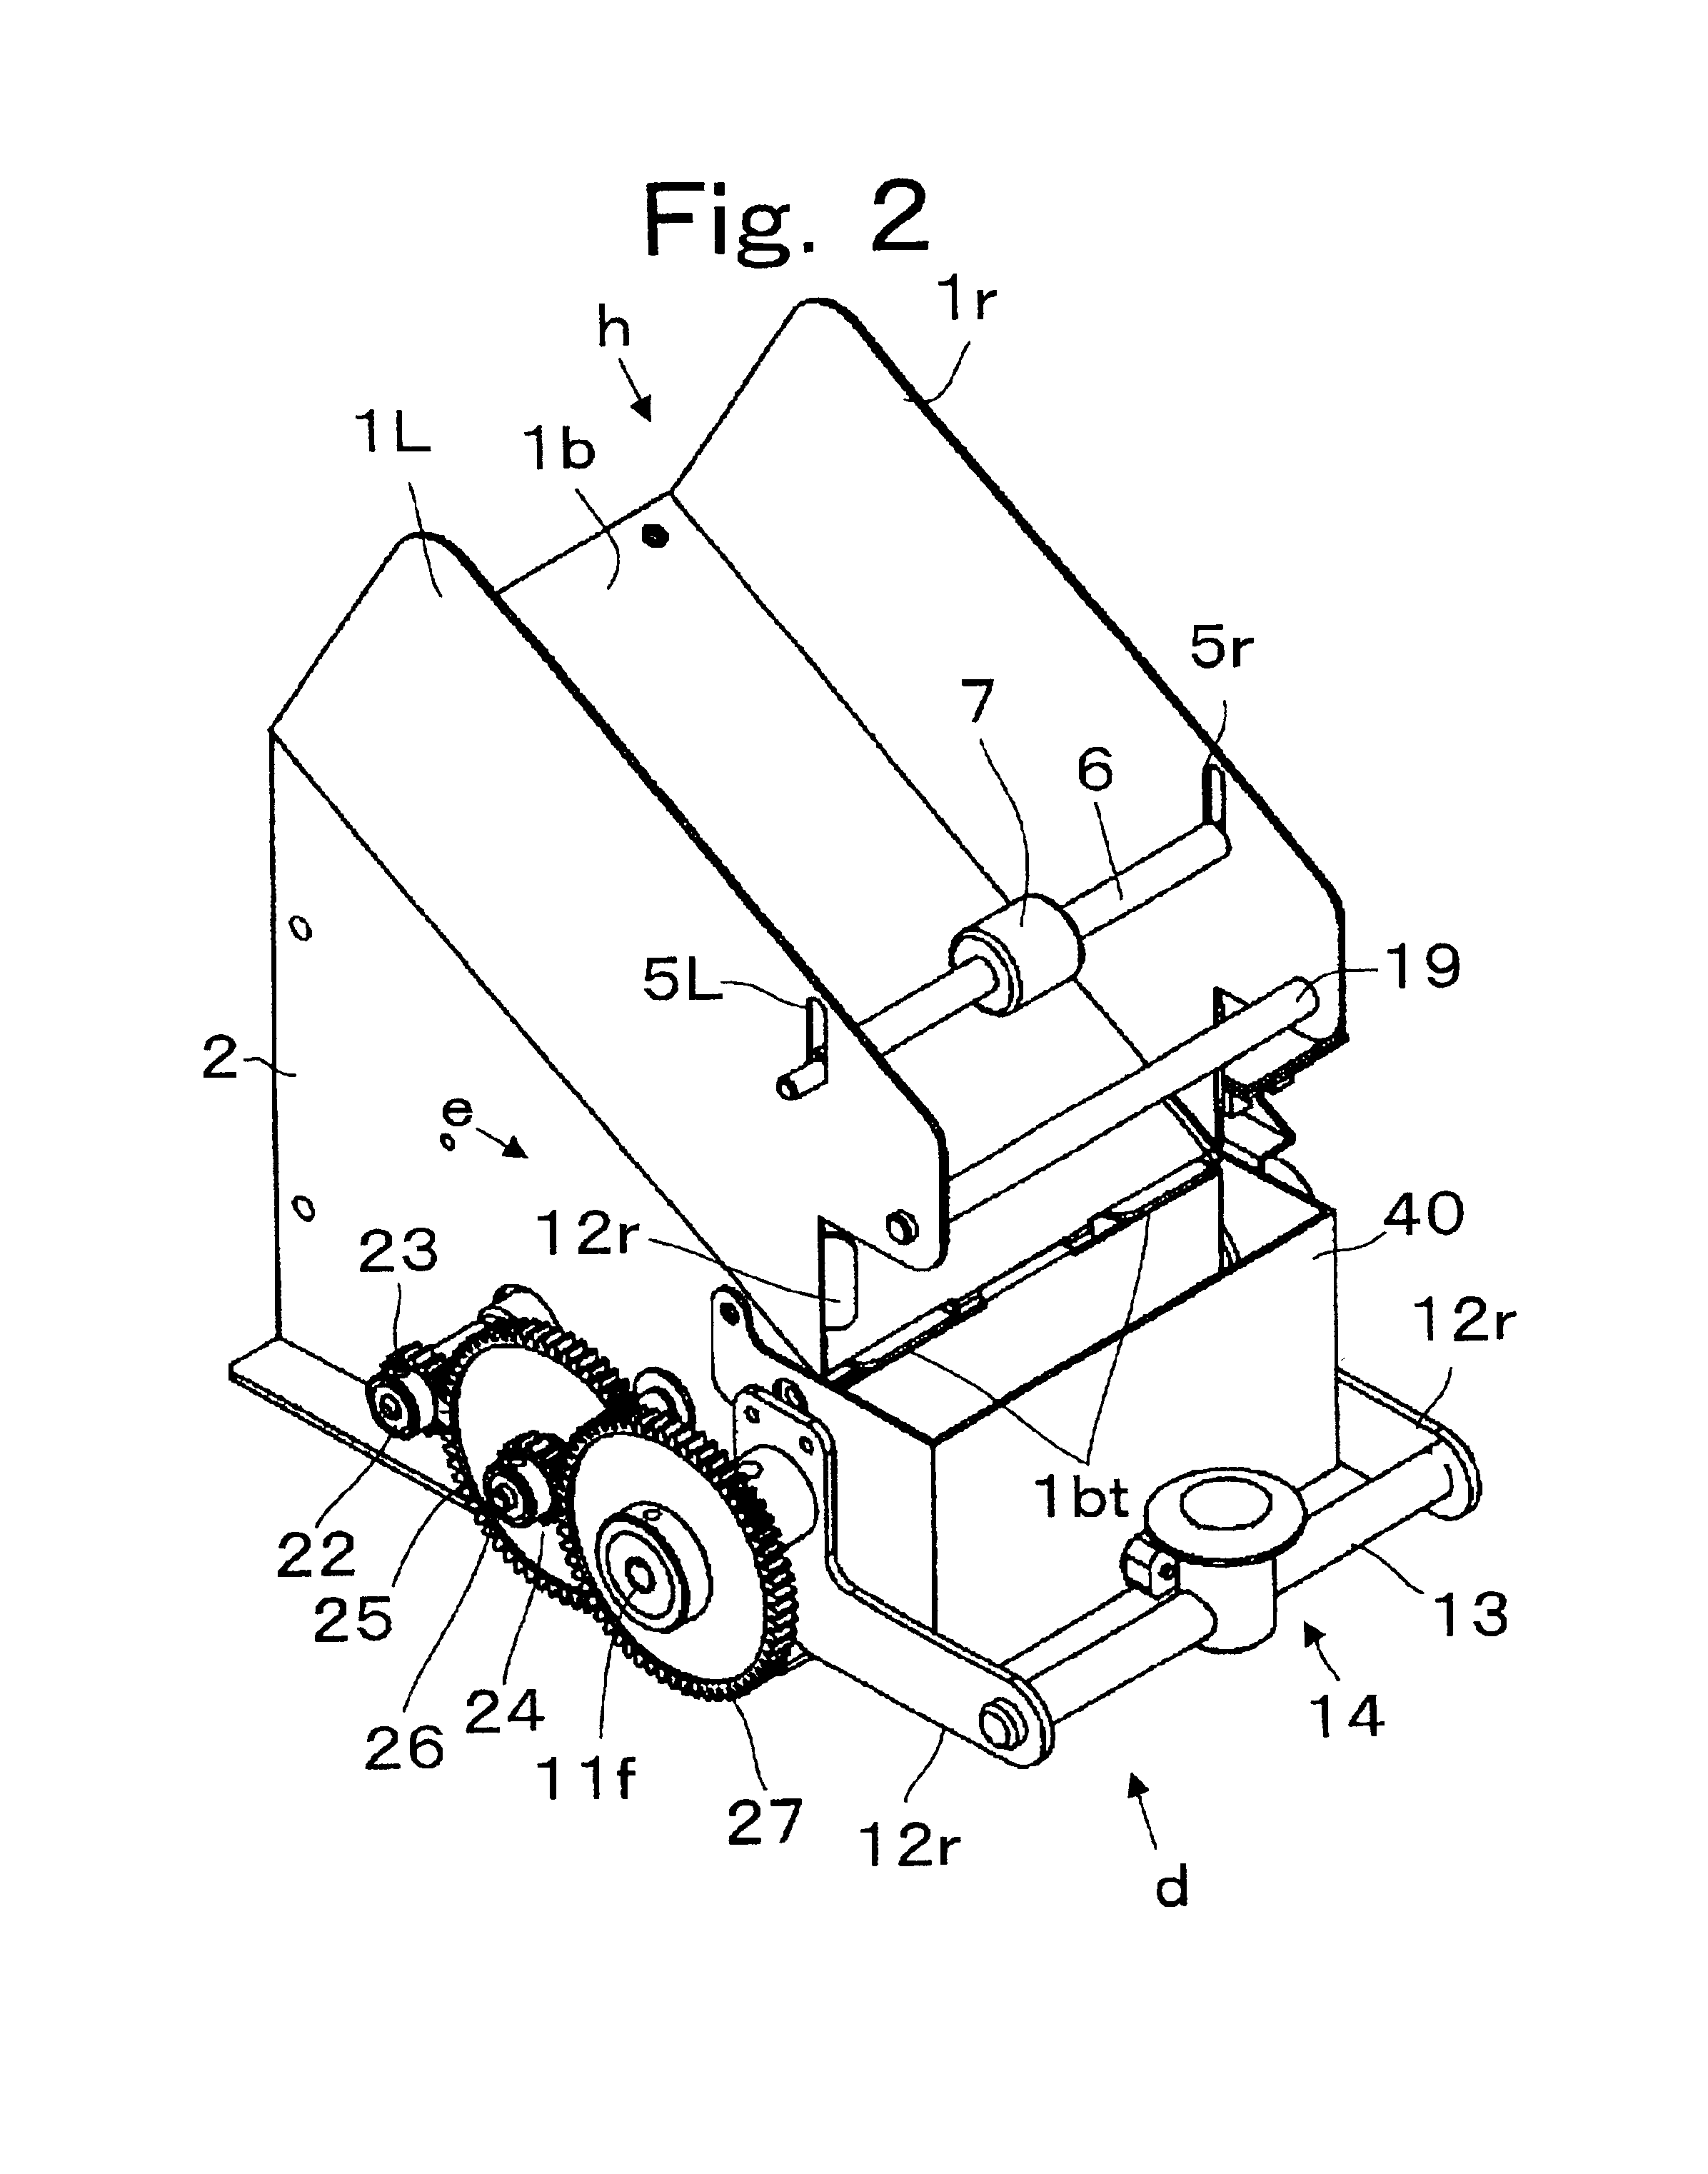 Automatic card dispensing unit with display capability